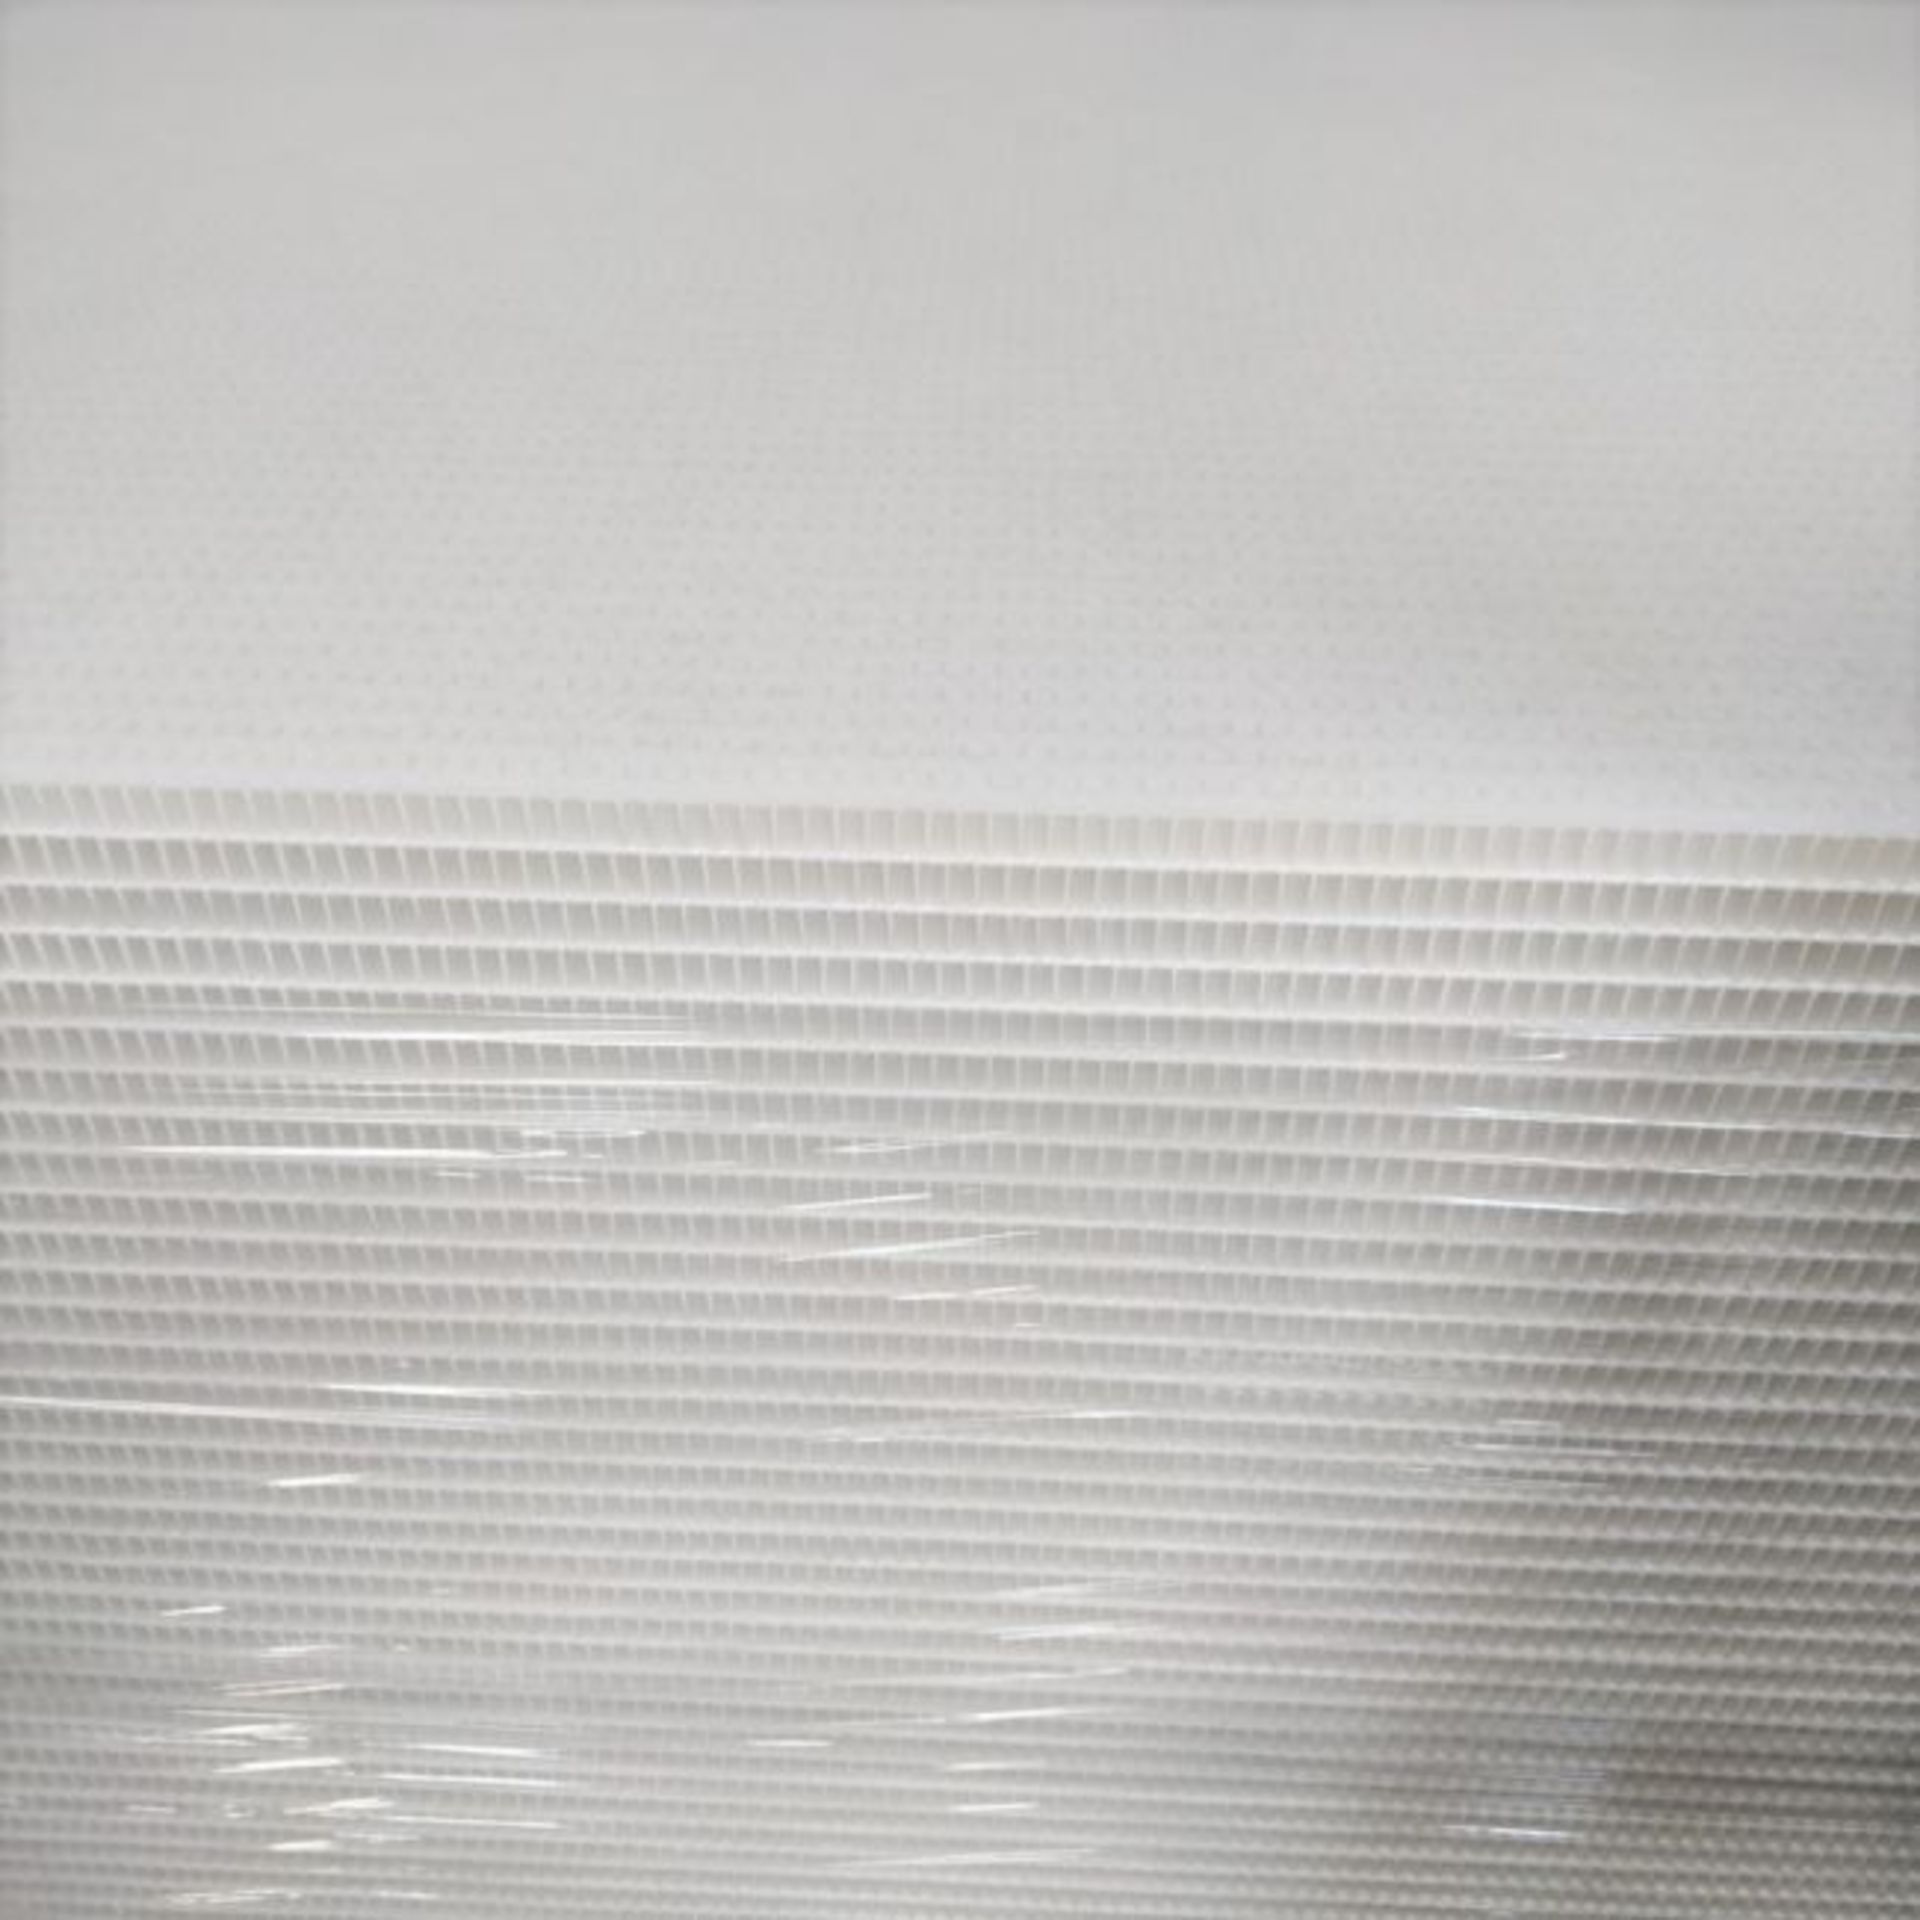 100 x ThermHex Thermoplastic Honeycomb Core Panels - Size: Approx. 2630 x 1210 x 18mm - New - Image 2 of 12